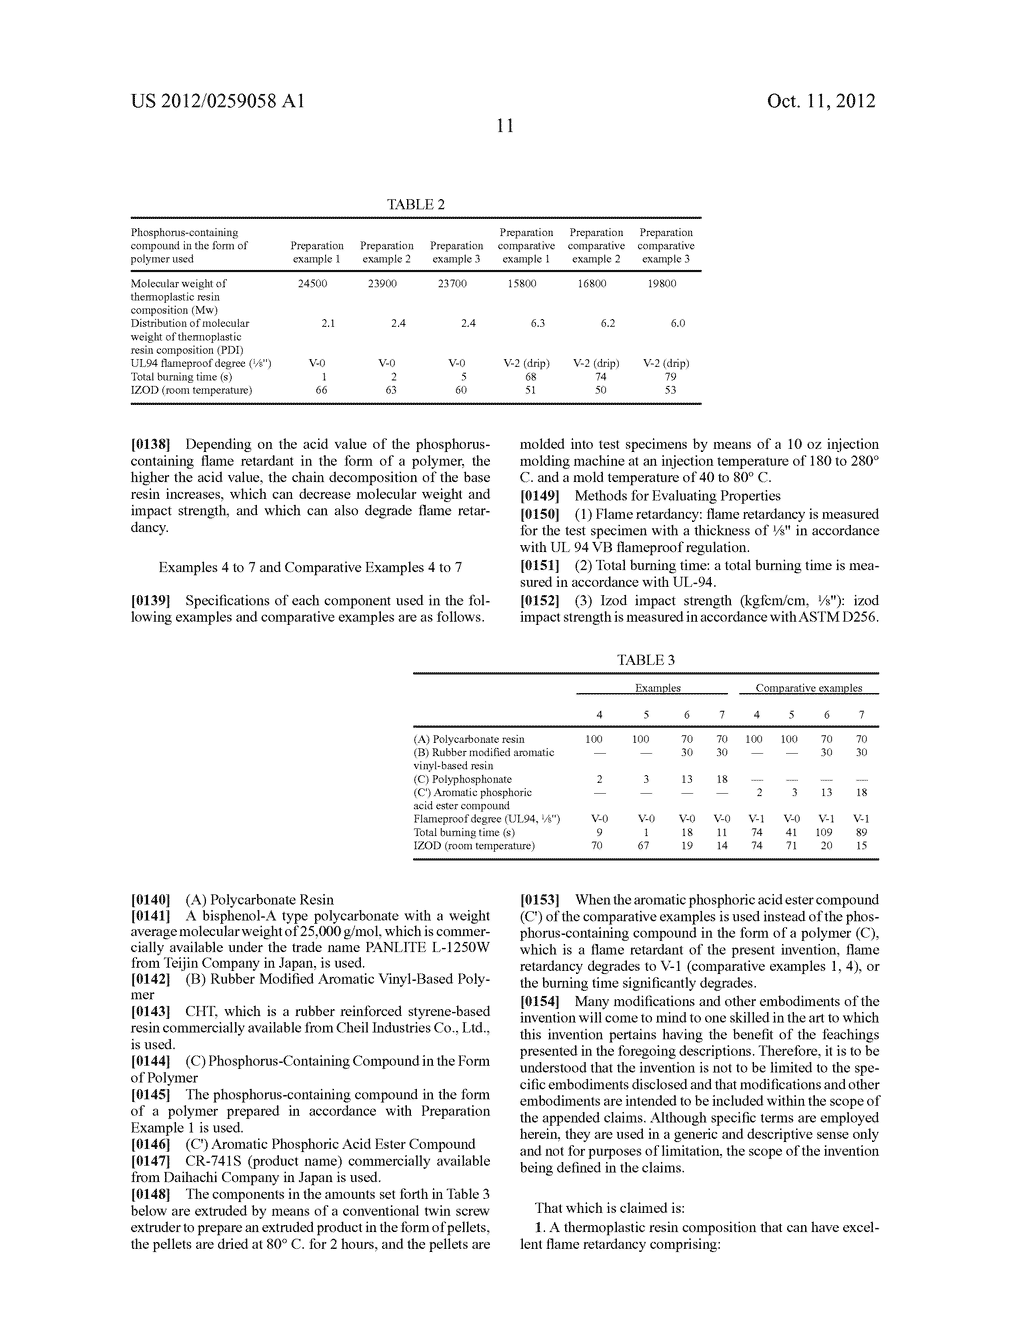 Thermoplastic Resin Composition Comprising a Phosphorus-Containing     Compound in the Form of Polymer, Plastic Molded Article Molded From the     Composition, and Method for Preparing a Phosphorus-Containing Compound in     the Form of Polymer - diagram, schematic, and image 12